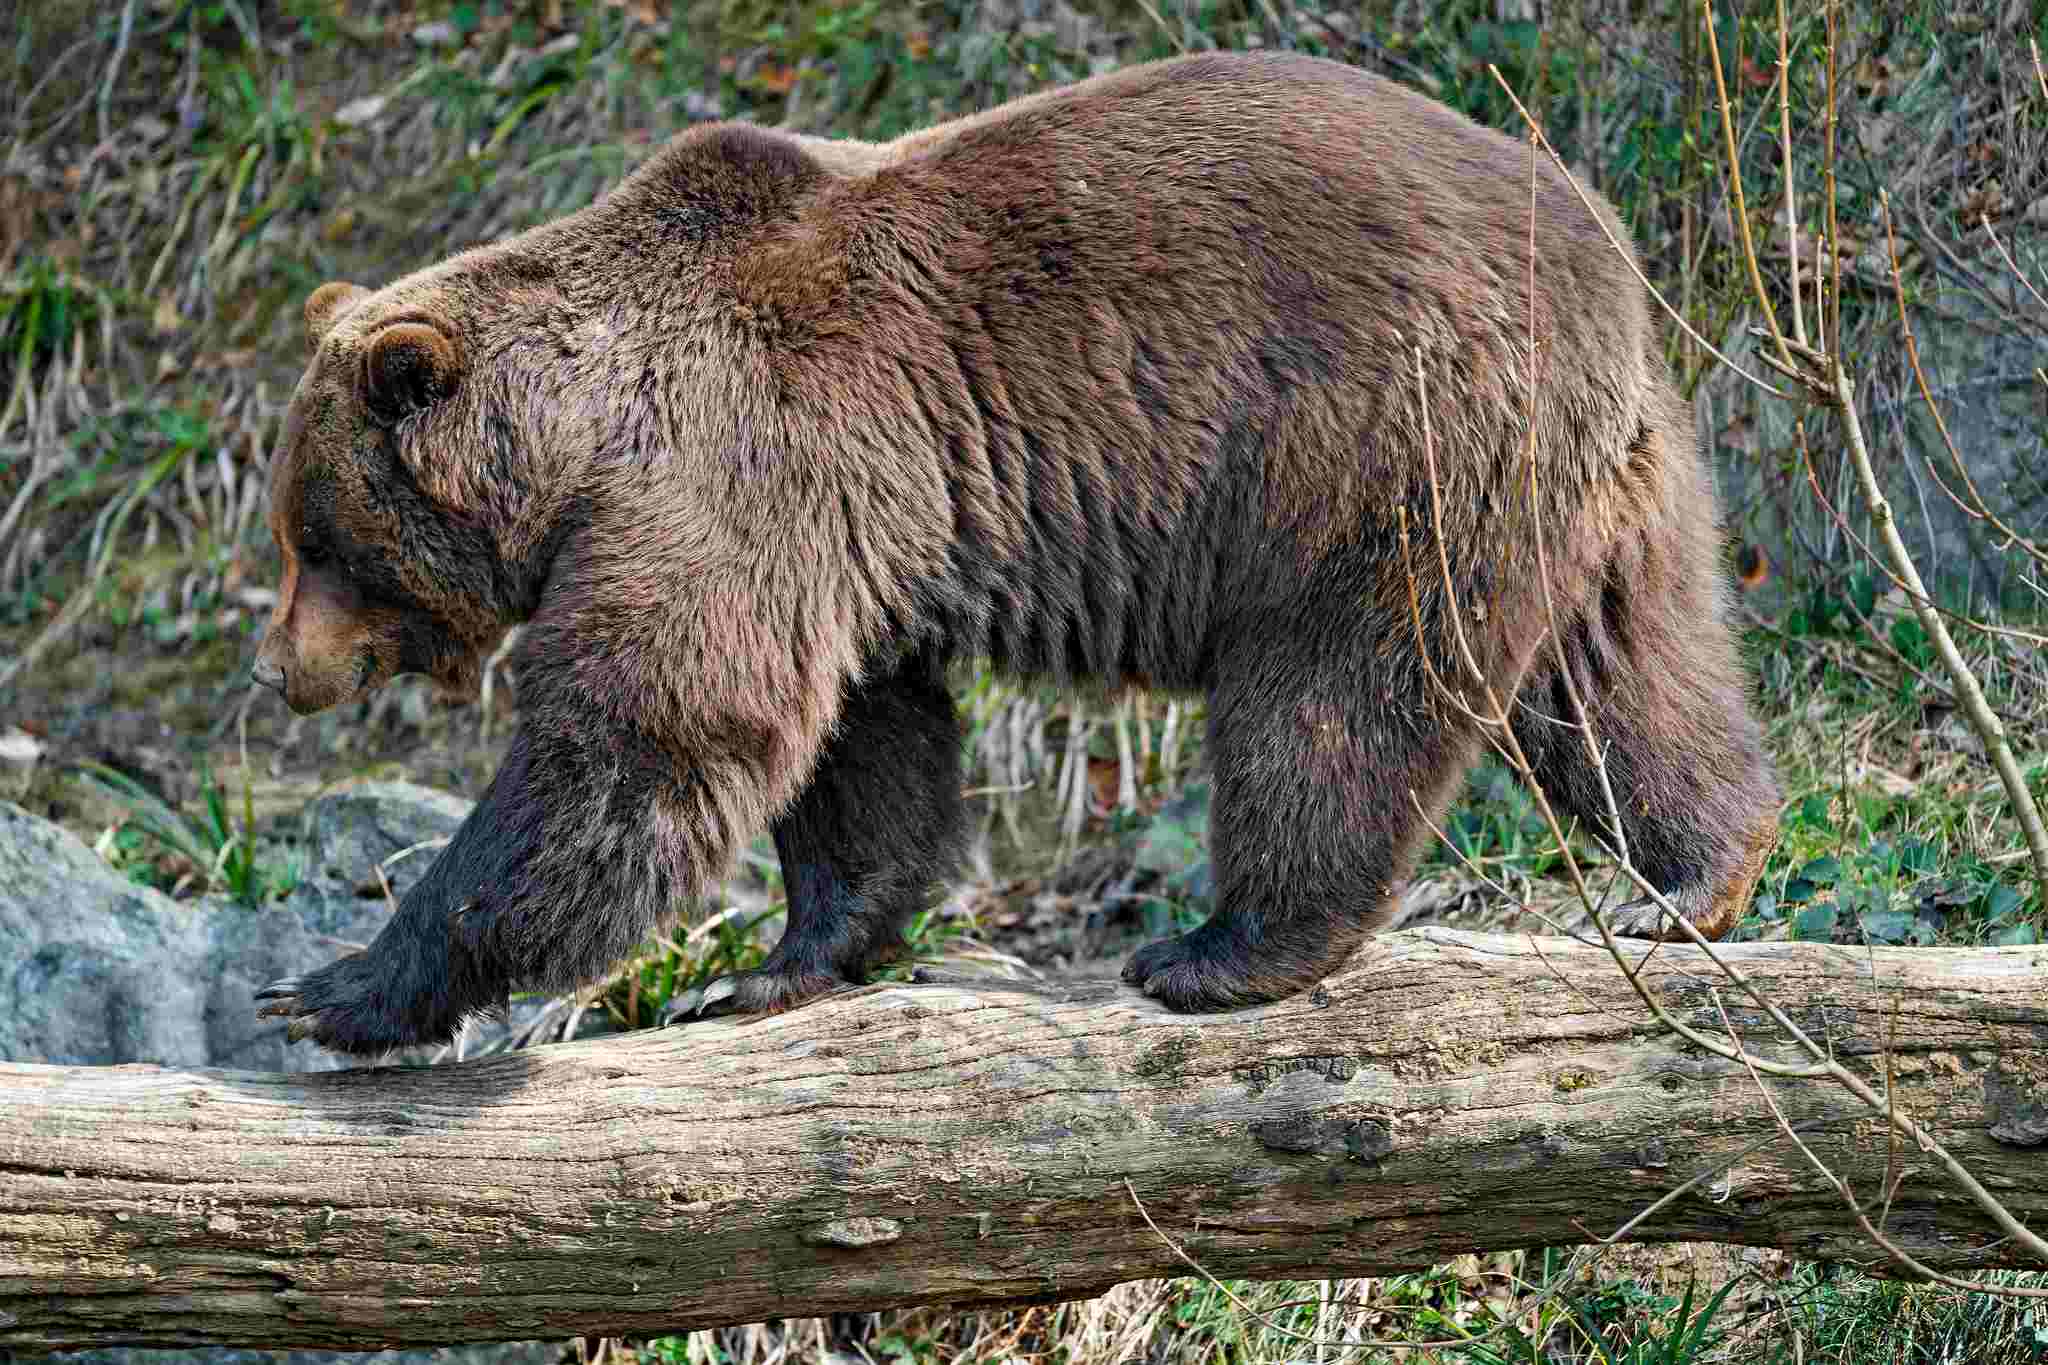 Wolverine Vs Bear: The Taxonomic Classification Sets Bears Apart from Wolverines (Credit: Tambako The Jaguar 2019 .CC BY-ND 2.0.)